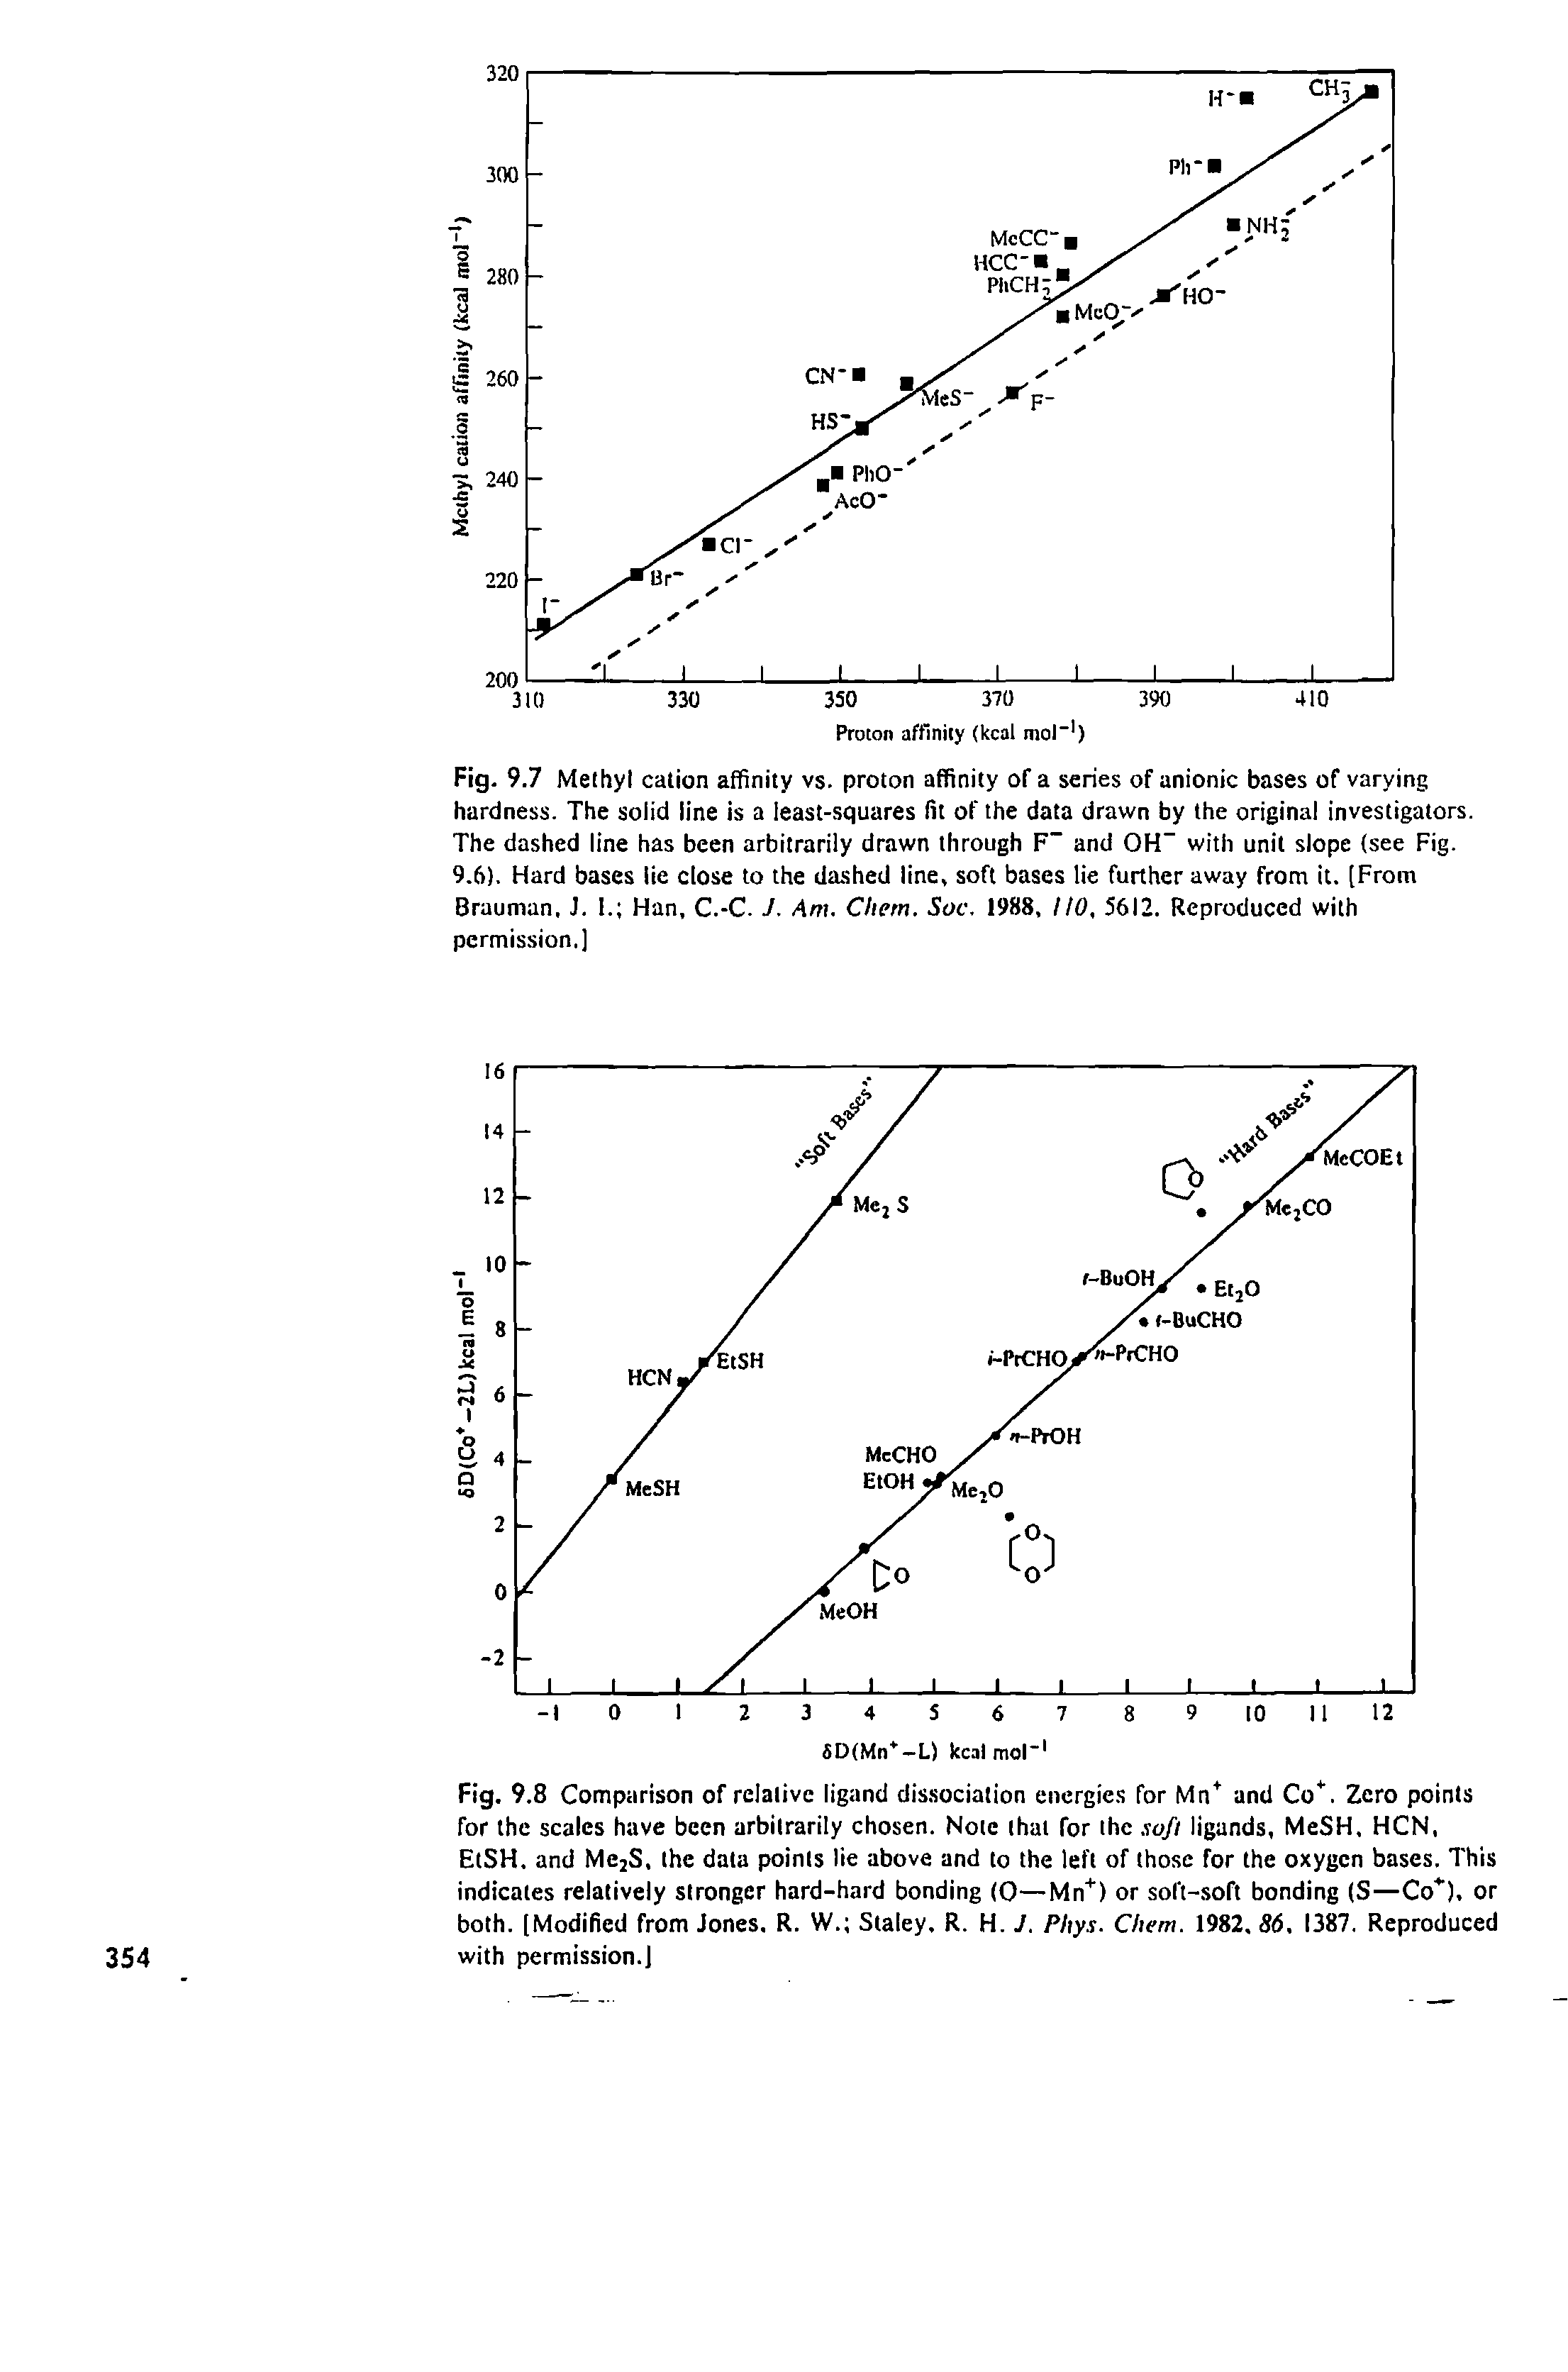 Fig. 9.8 Comparison of relative ligand dissociation energies for Mn and Co. Zero points for the scales have been arbitrarily chosen. Note that for the. wfi ligands, MeSH, HCN, EtSH. and Me2S, the data points lie above and to the left of those for the oxygen bases. This indicates relatively stronger hard-hard bonding (0—Mn ) or soft-soft bonding (S—Co ), or both. [Modified from Jones. R. W. Staley. R. H. J. Phys. Chem. 1982. 86, 1387. Reproduced with permission.]...